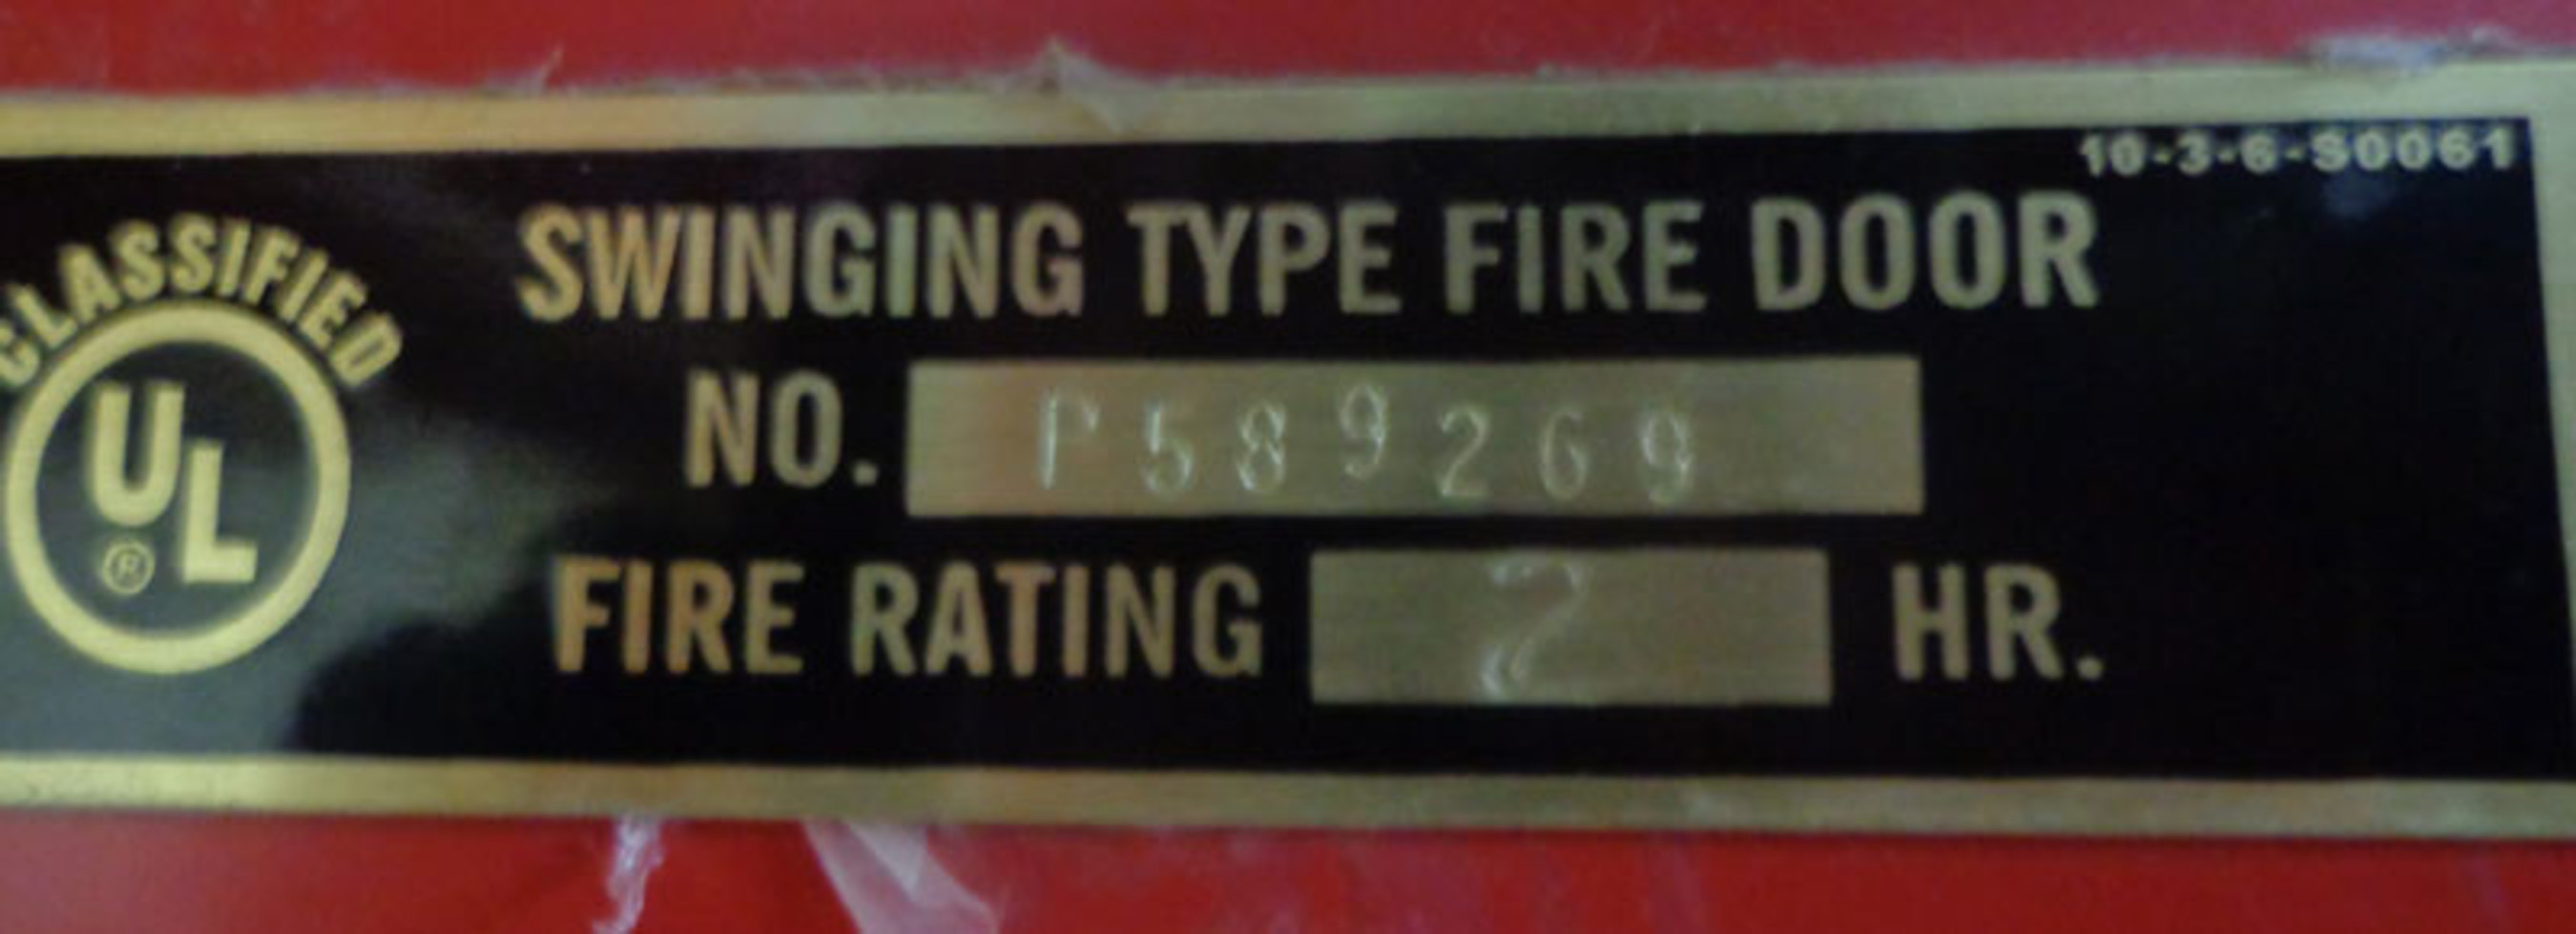 This is the UL Label which appears on the fire rated doors